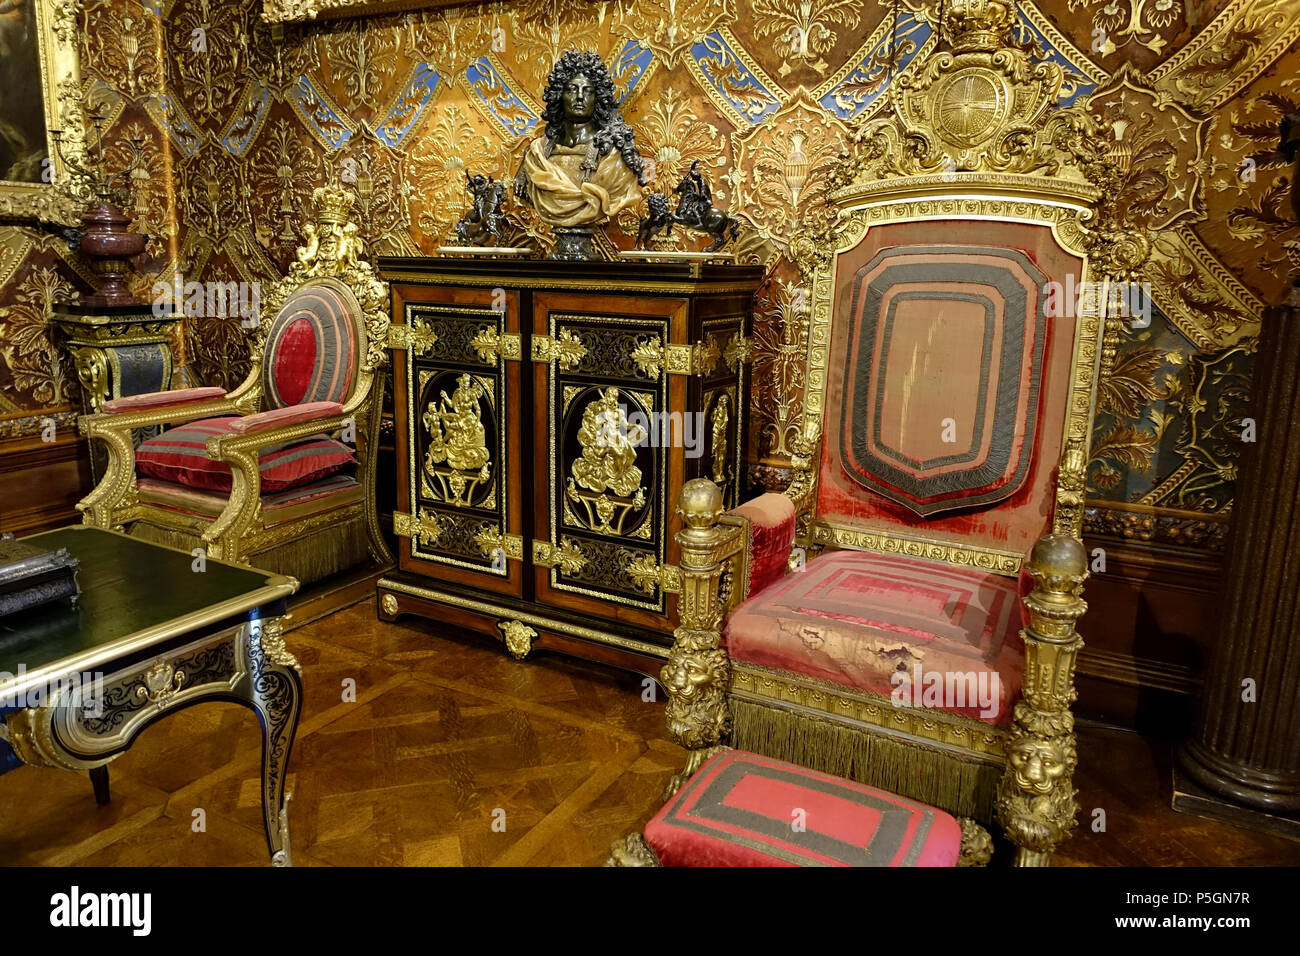 N/A. English: State Music Room, Chatsworth House - Derbyshire, England. 18  June 2016, 10:14:42. Daderot 381 Coronation chairs of Queen Adelaide and  William IV - State Music Room, Chatsworth House - Derbyshire, England -  DSC03205 Stock Photo - Alamy